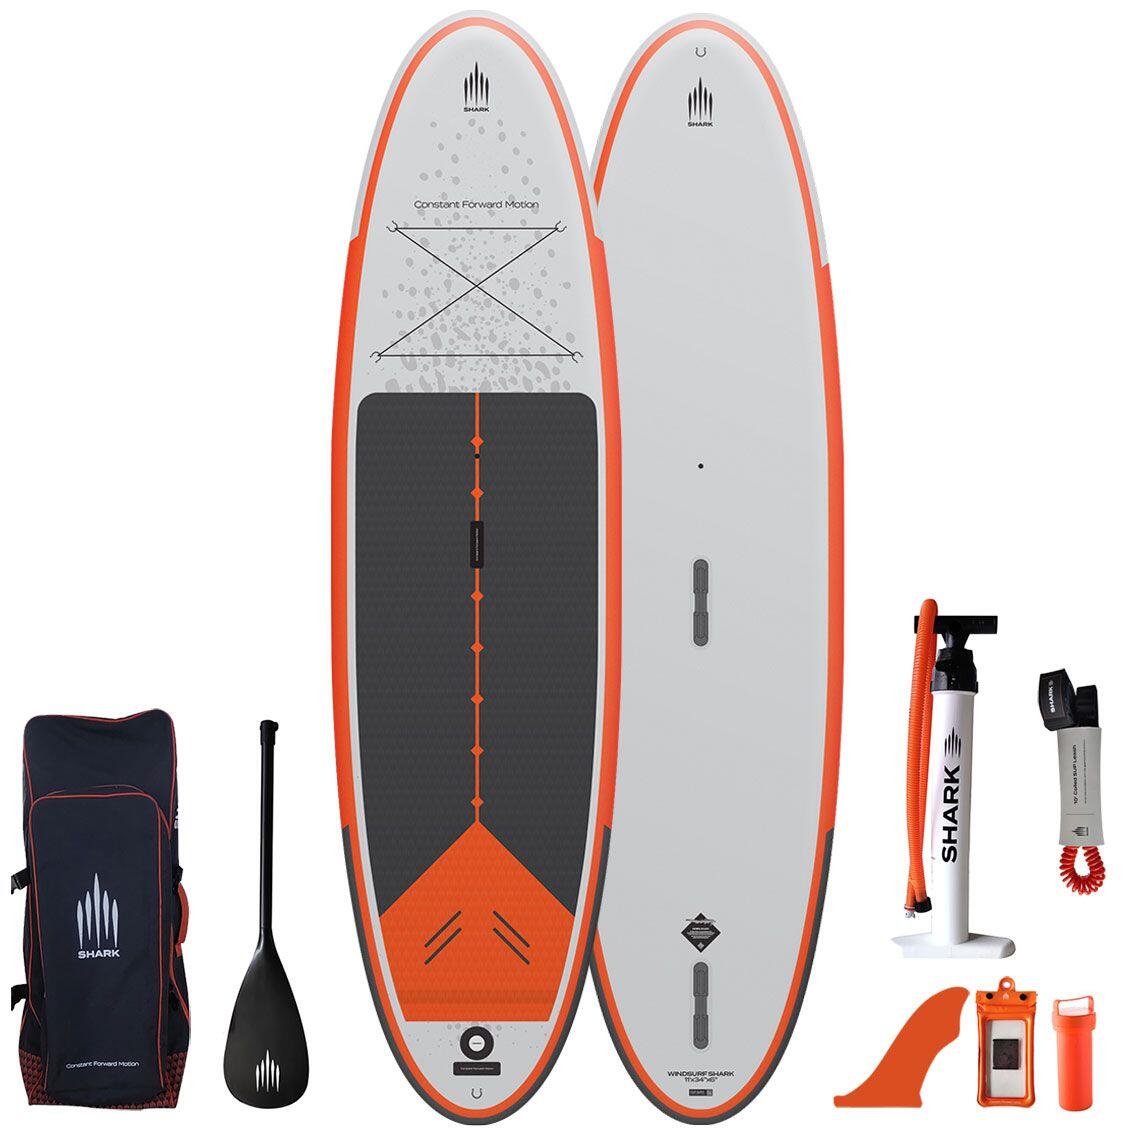 SHARK SHARK ALL ROUND 3-in-1 WIND SUP 10'6 X 32" X 5" Paddle Board